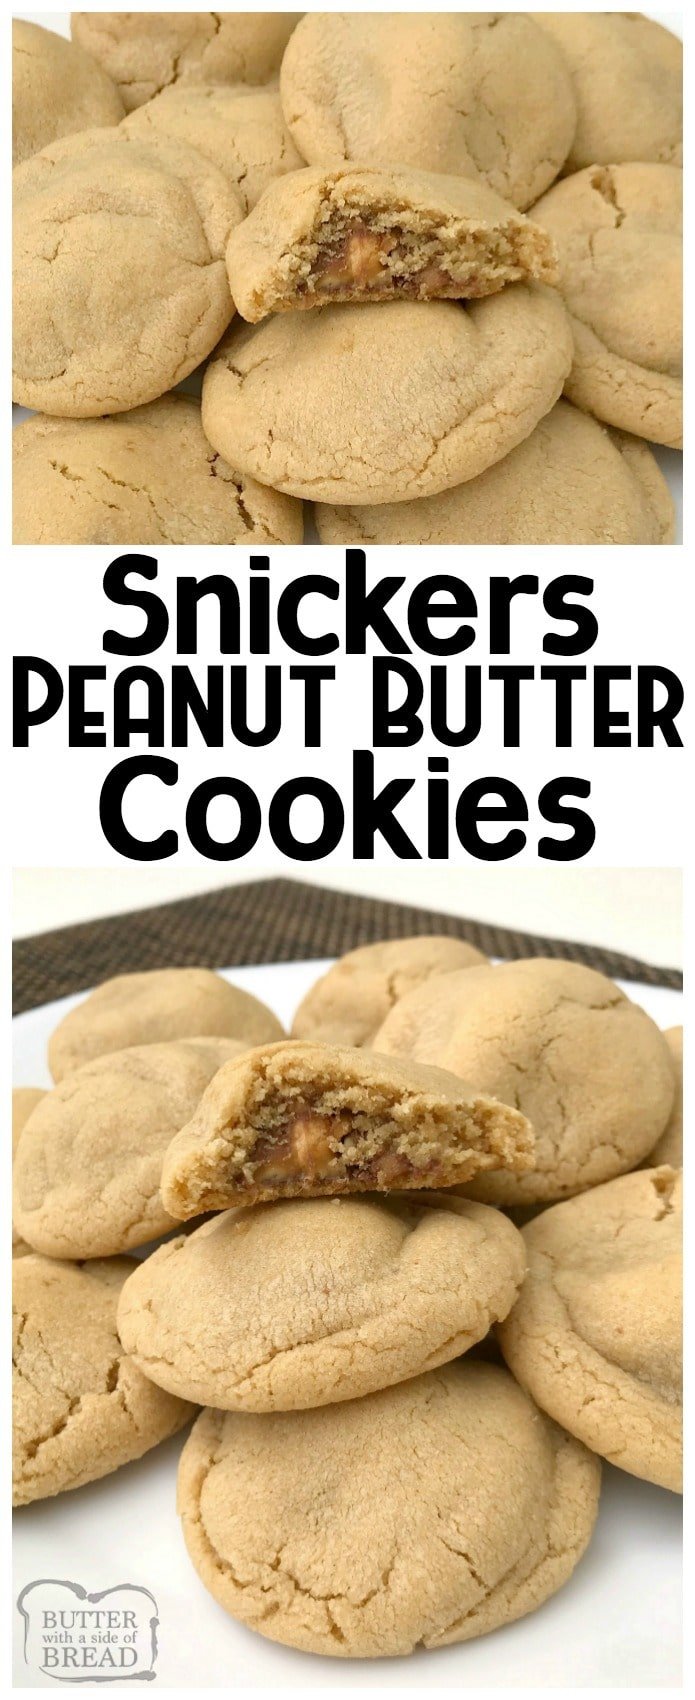 Snickers Peanut Butter Cookies take an already incredible soft and delicious peanut butter cookie recipe, and add a Snickers surprise in the middle!